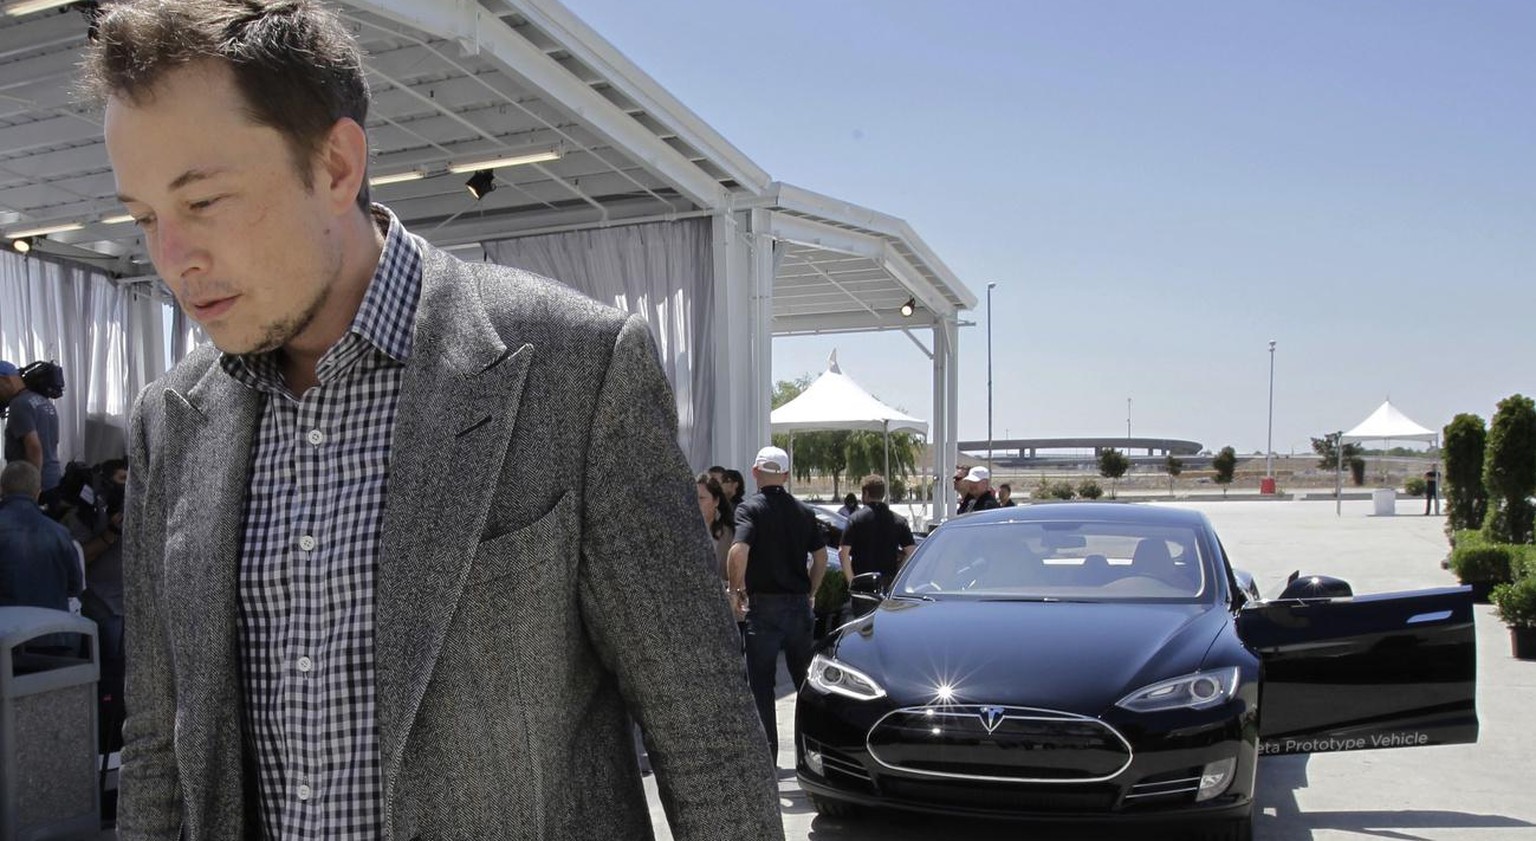 FILE - In this Friday, June 22, 2012 file photo, Tesla CEO Elon Musk walks past the Tesla Model S after a news conference at the Tesla factory in Fremont, Calif. Musk on Tuesday, Nov. 5, 2013, blamed  ...